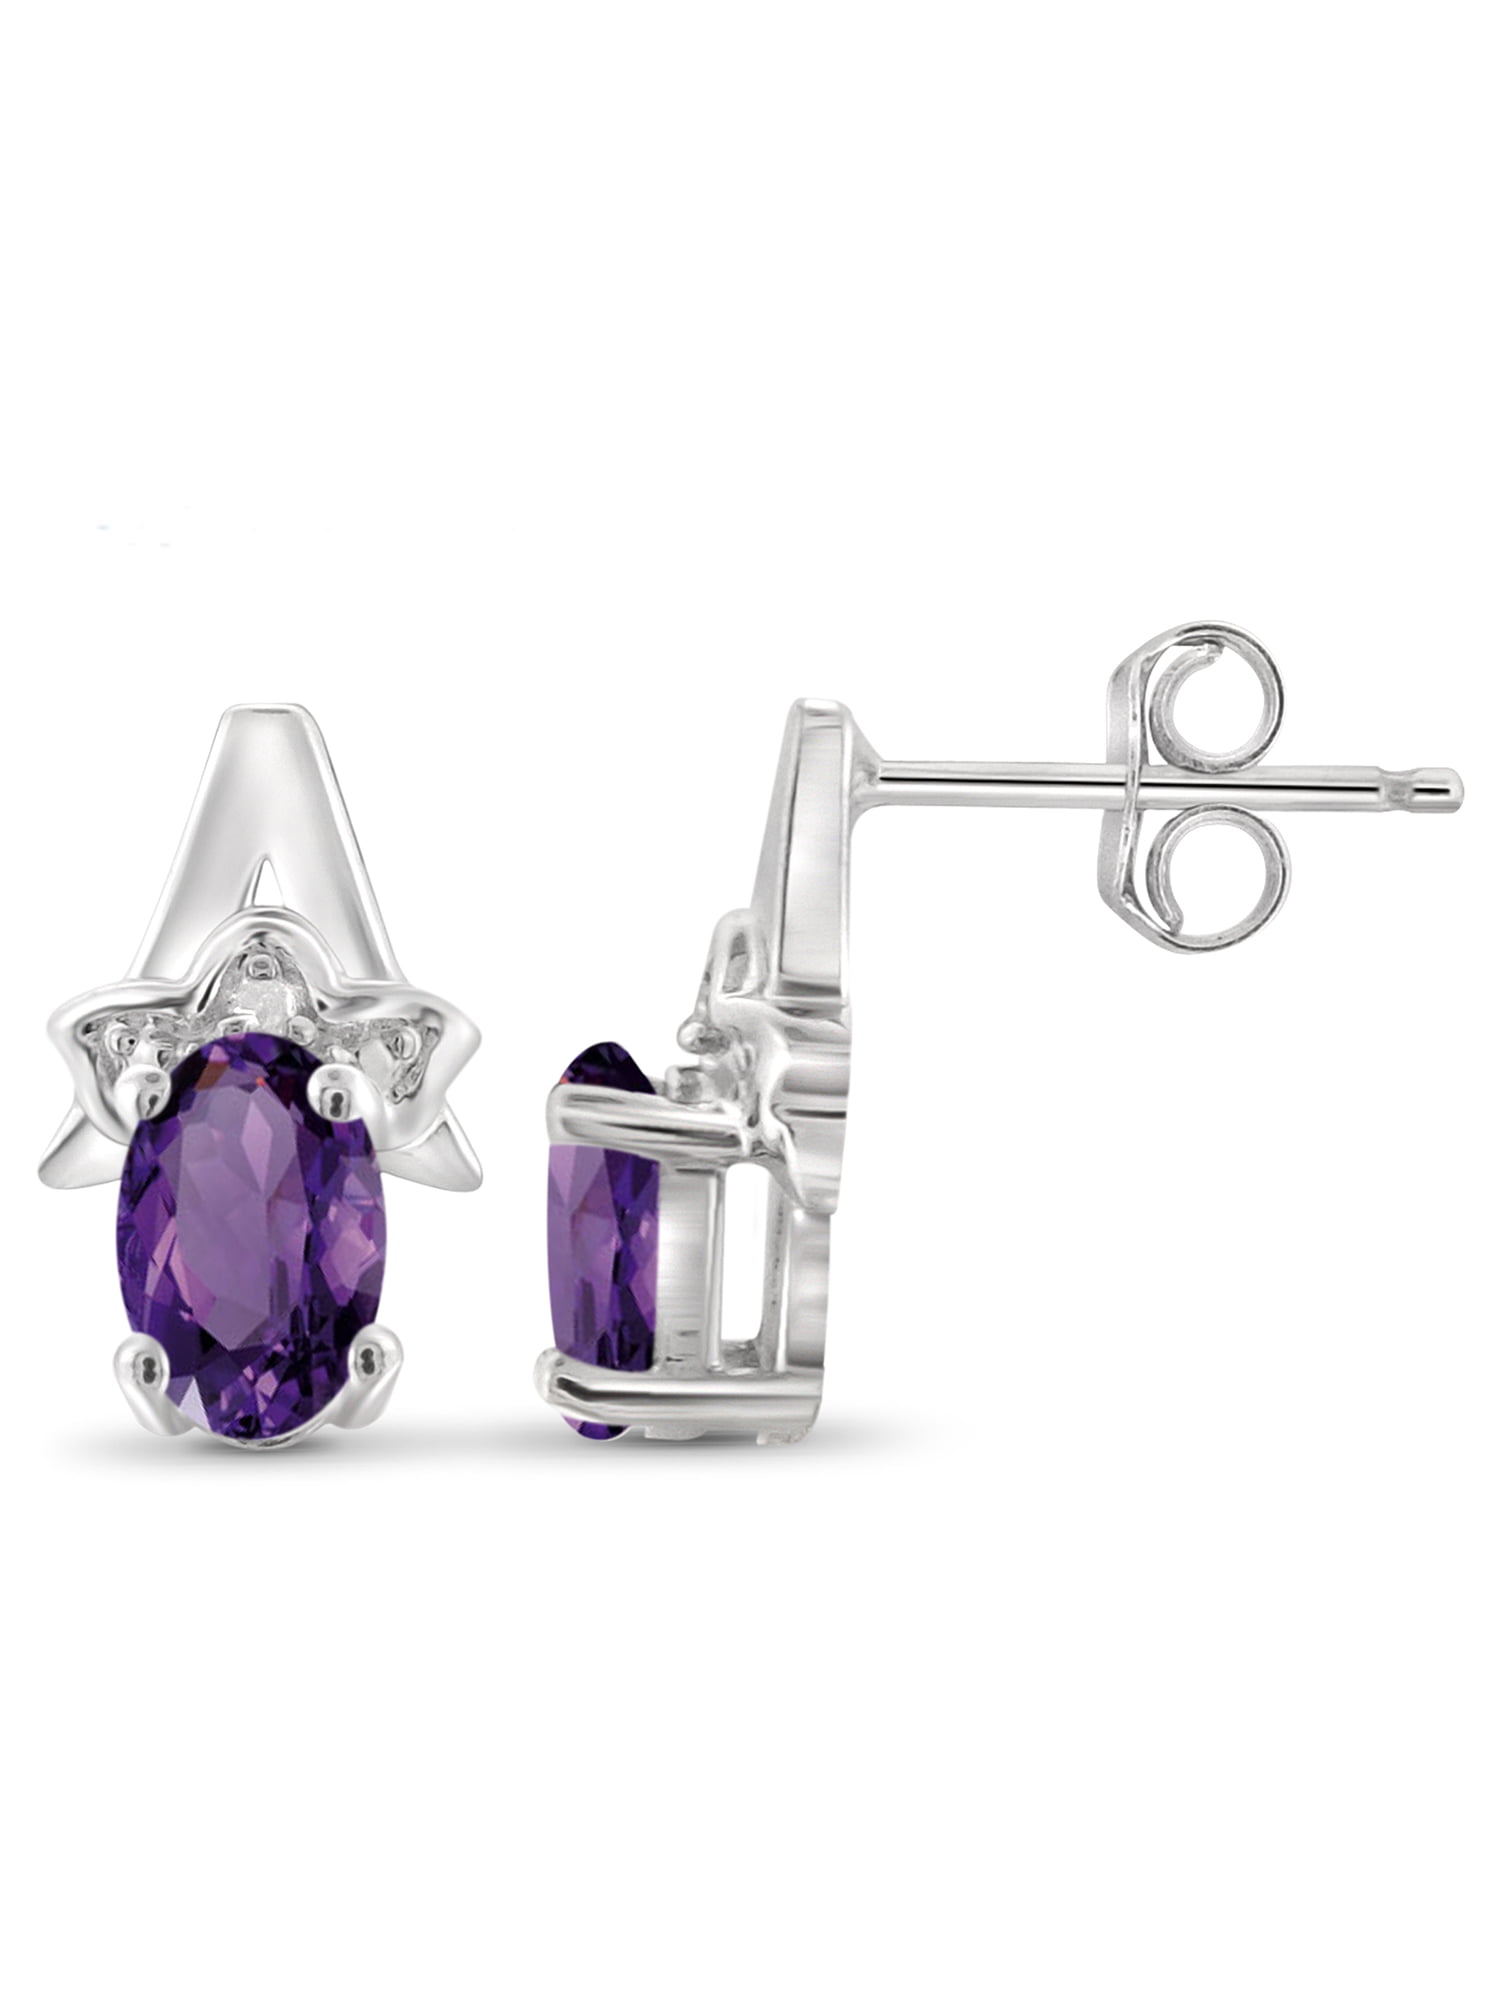 0.84 Carat T.G.W. Amethyst Gemstone and White Diamond Accent Earrings ...